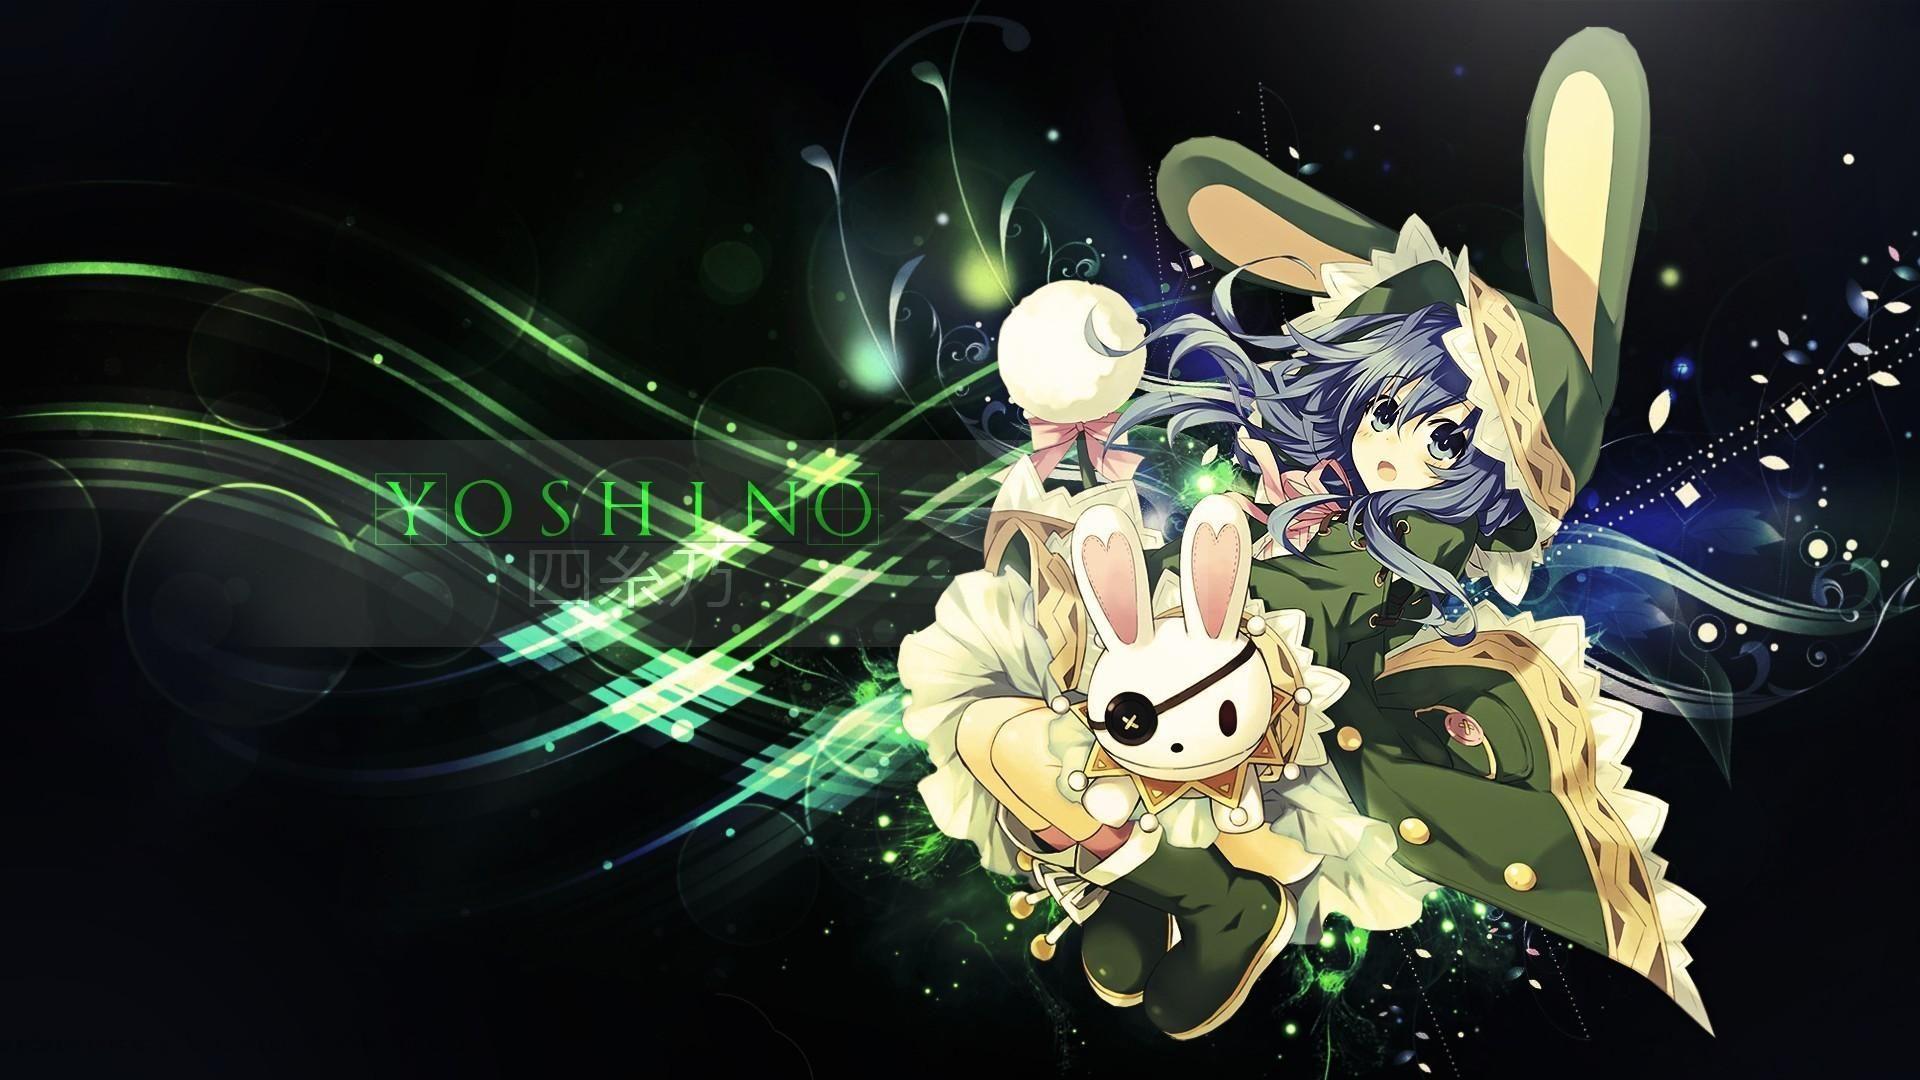 Date a Live Anime Wallpaper Free Date a Live Anime